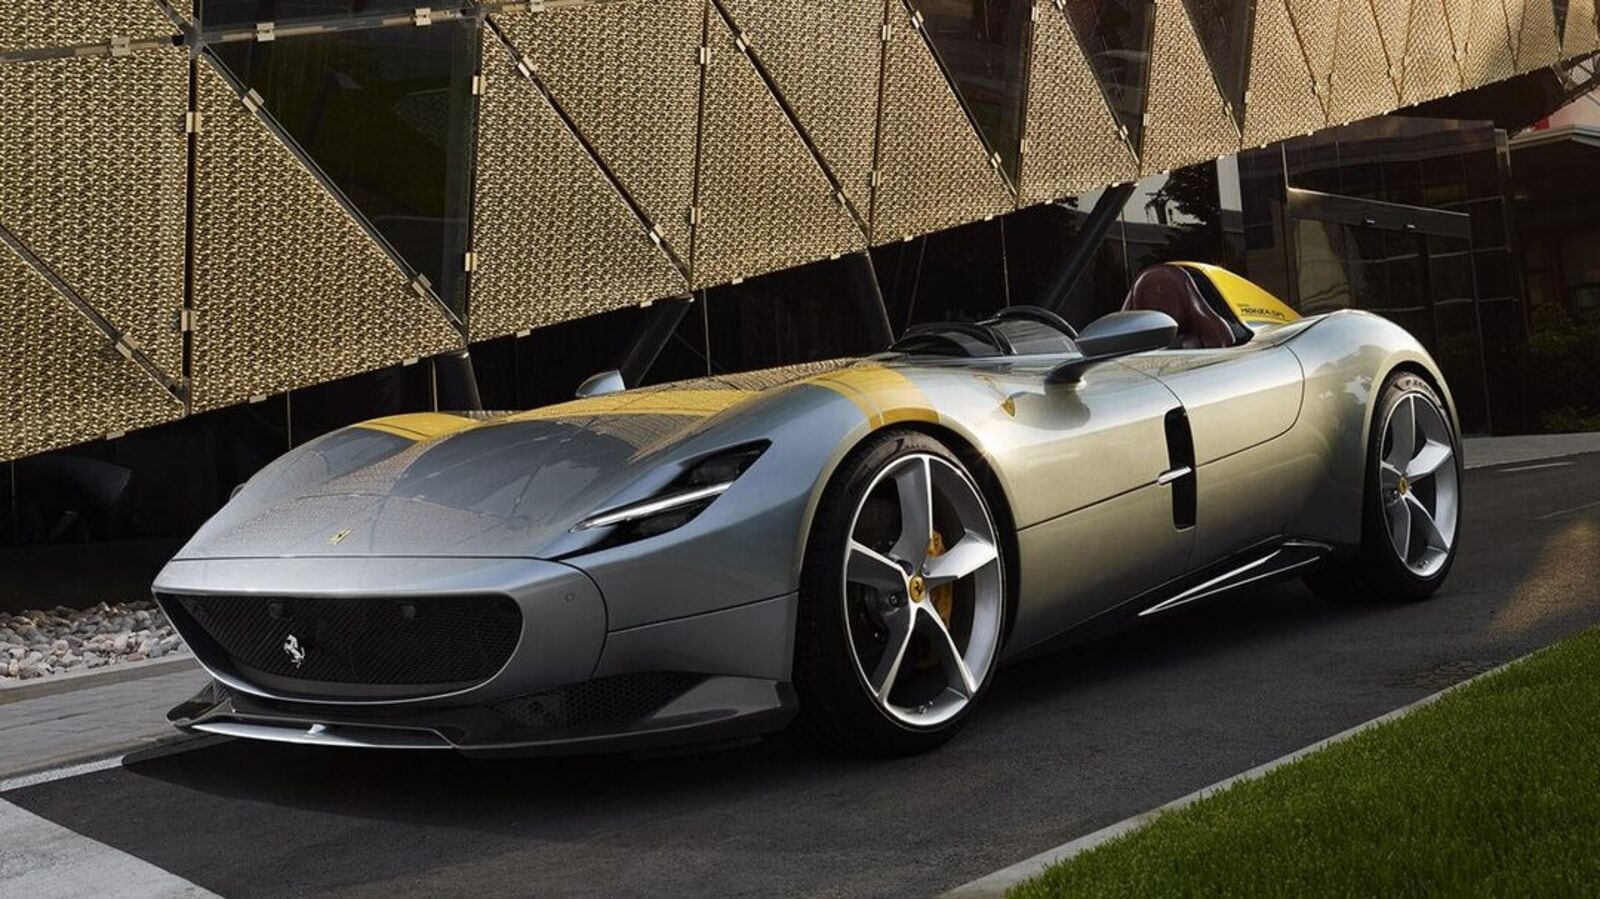  Expensive Ferrari supercars set to be even more expensive.  Blame it on inflation
